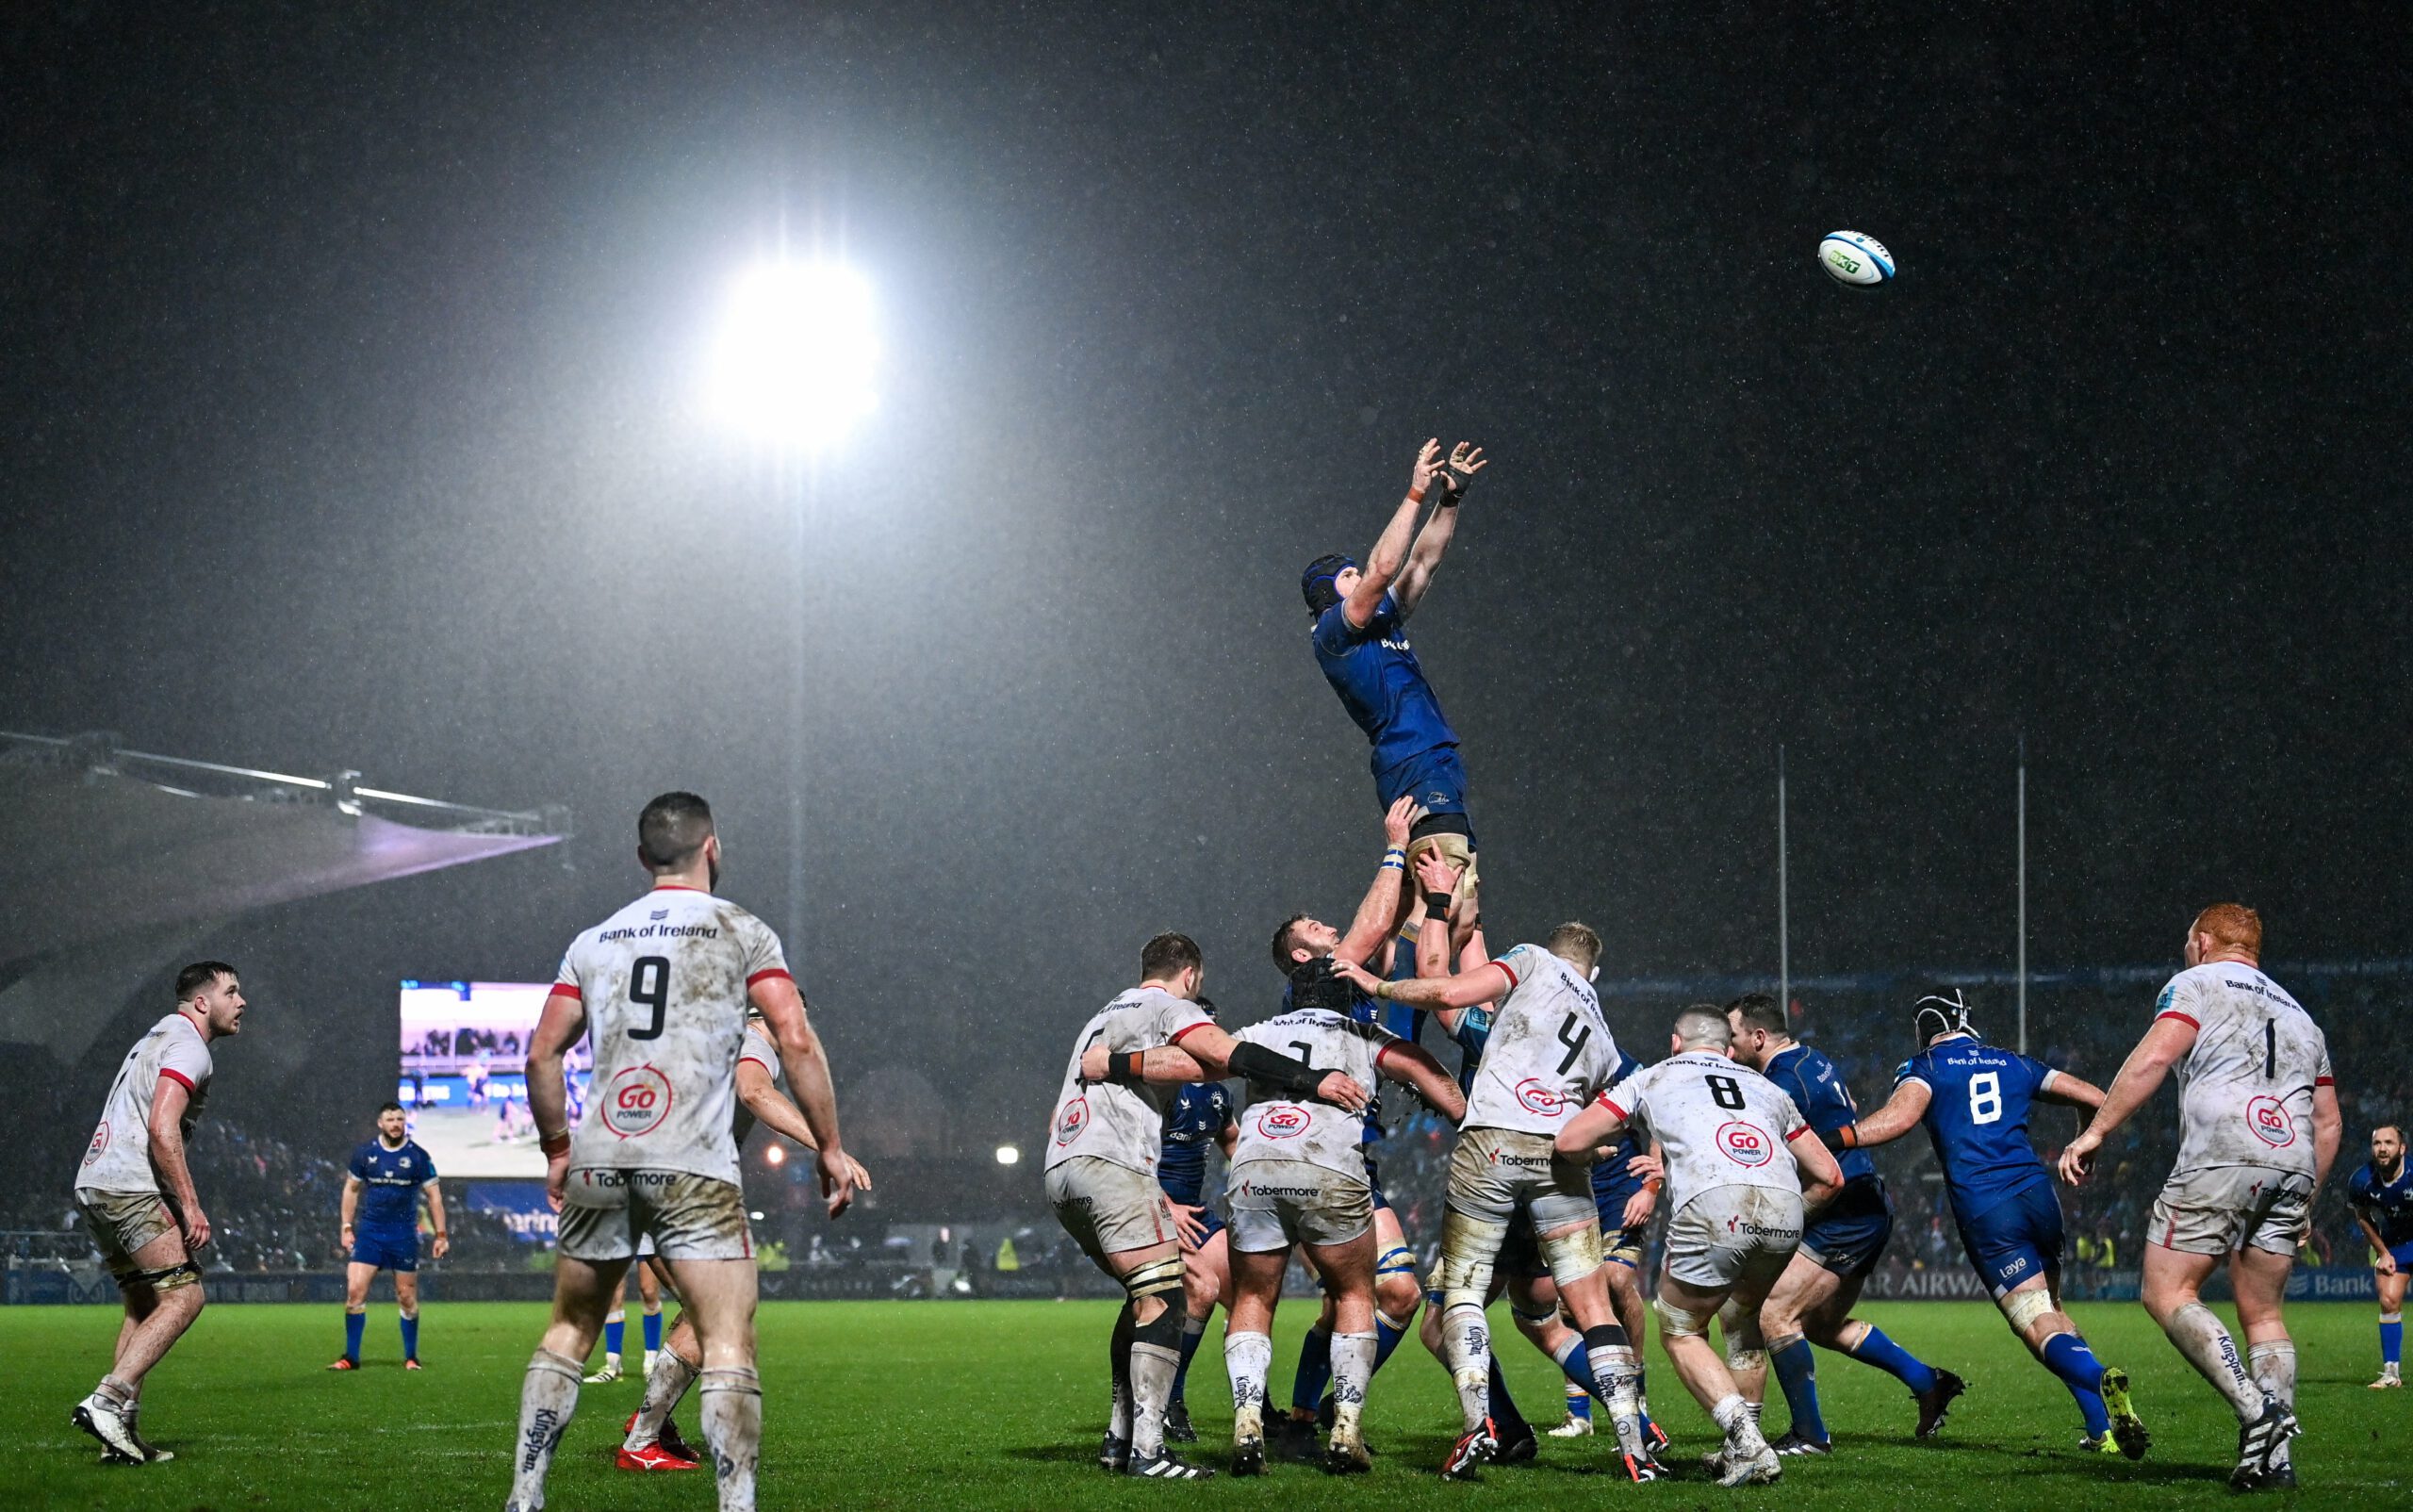 Ryan Baird of Leinster wins possession in the lineout